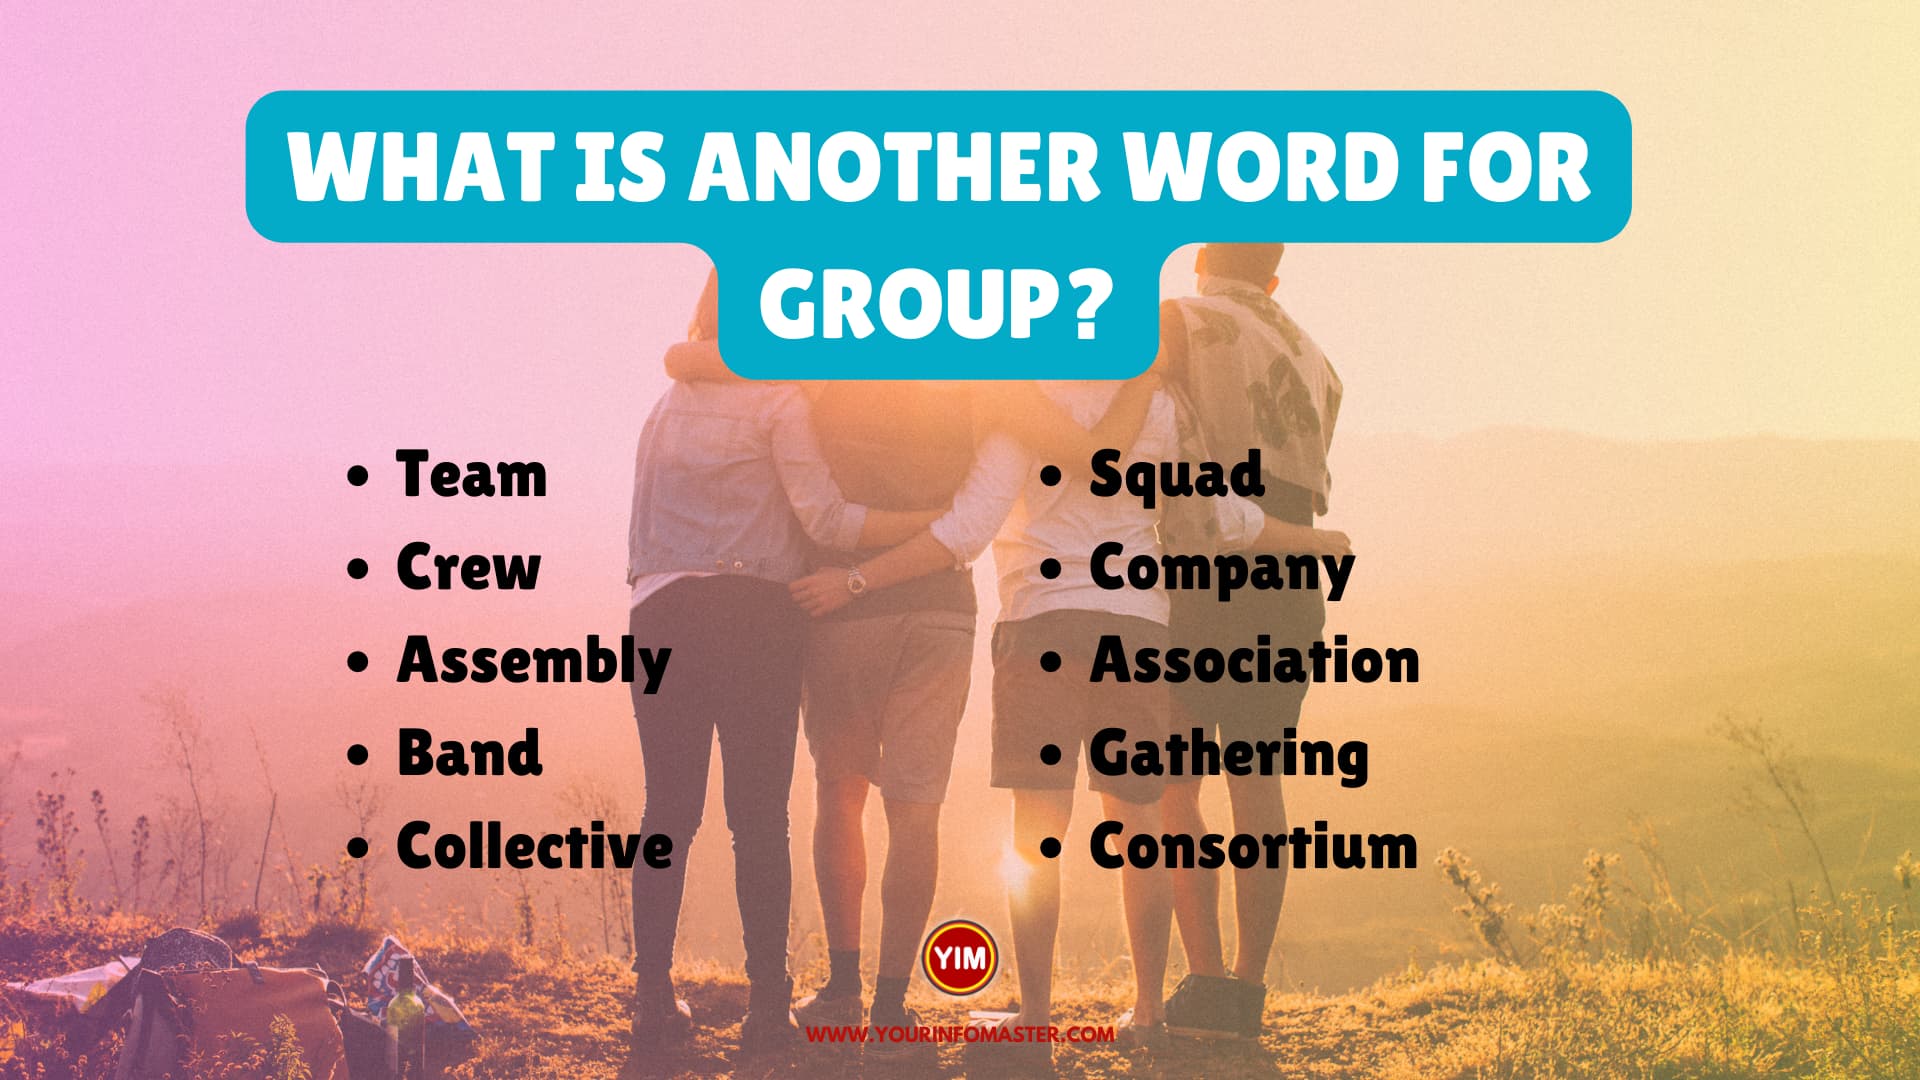 What is another word for Group